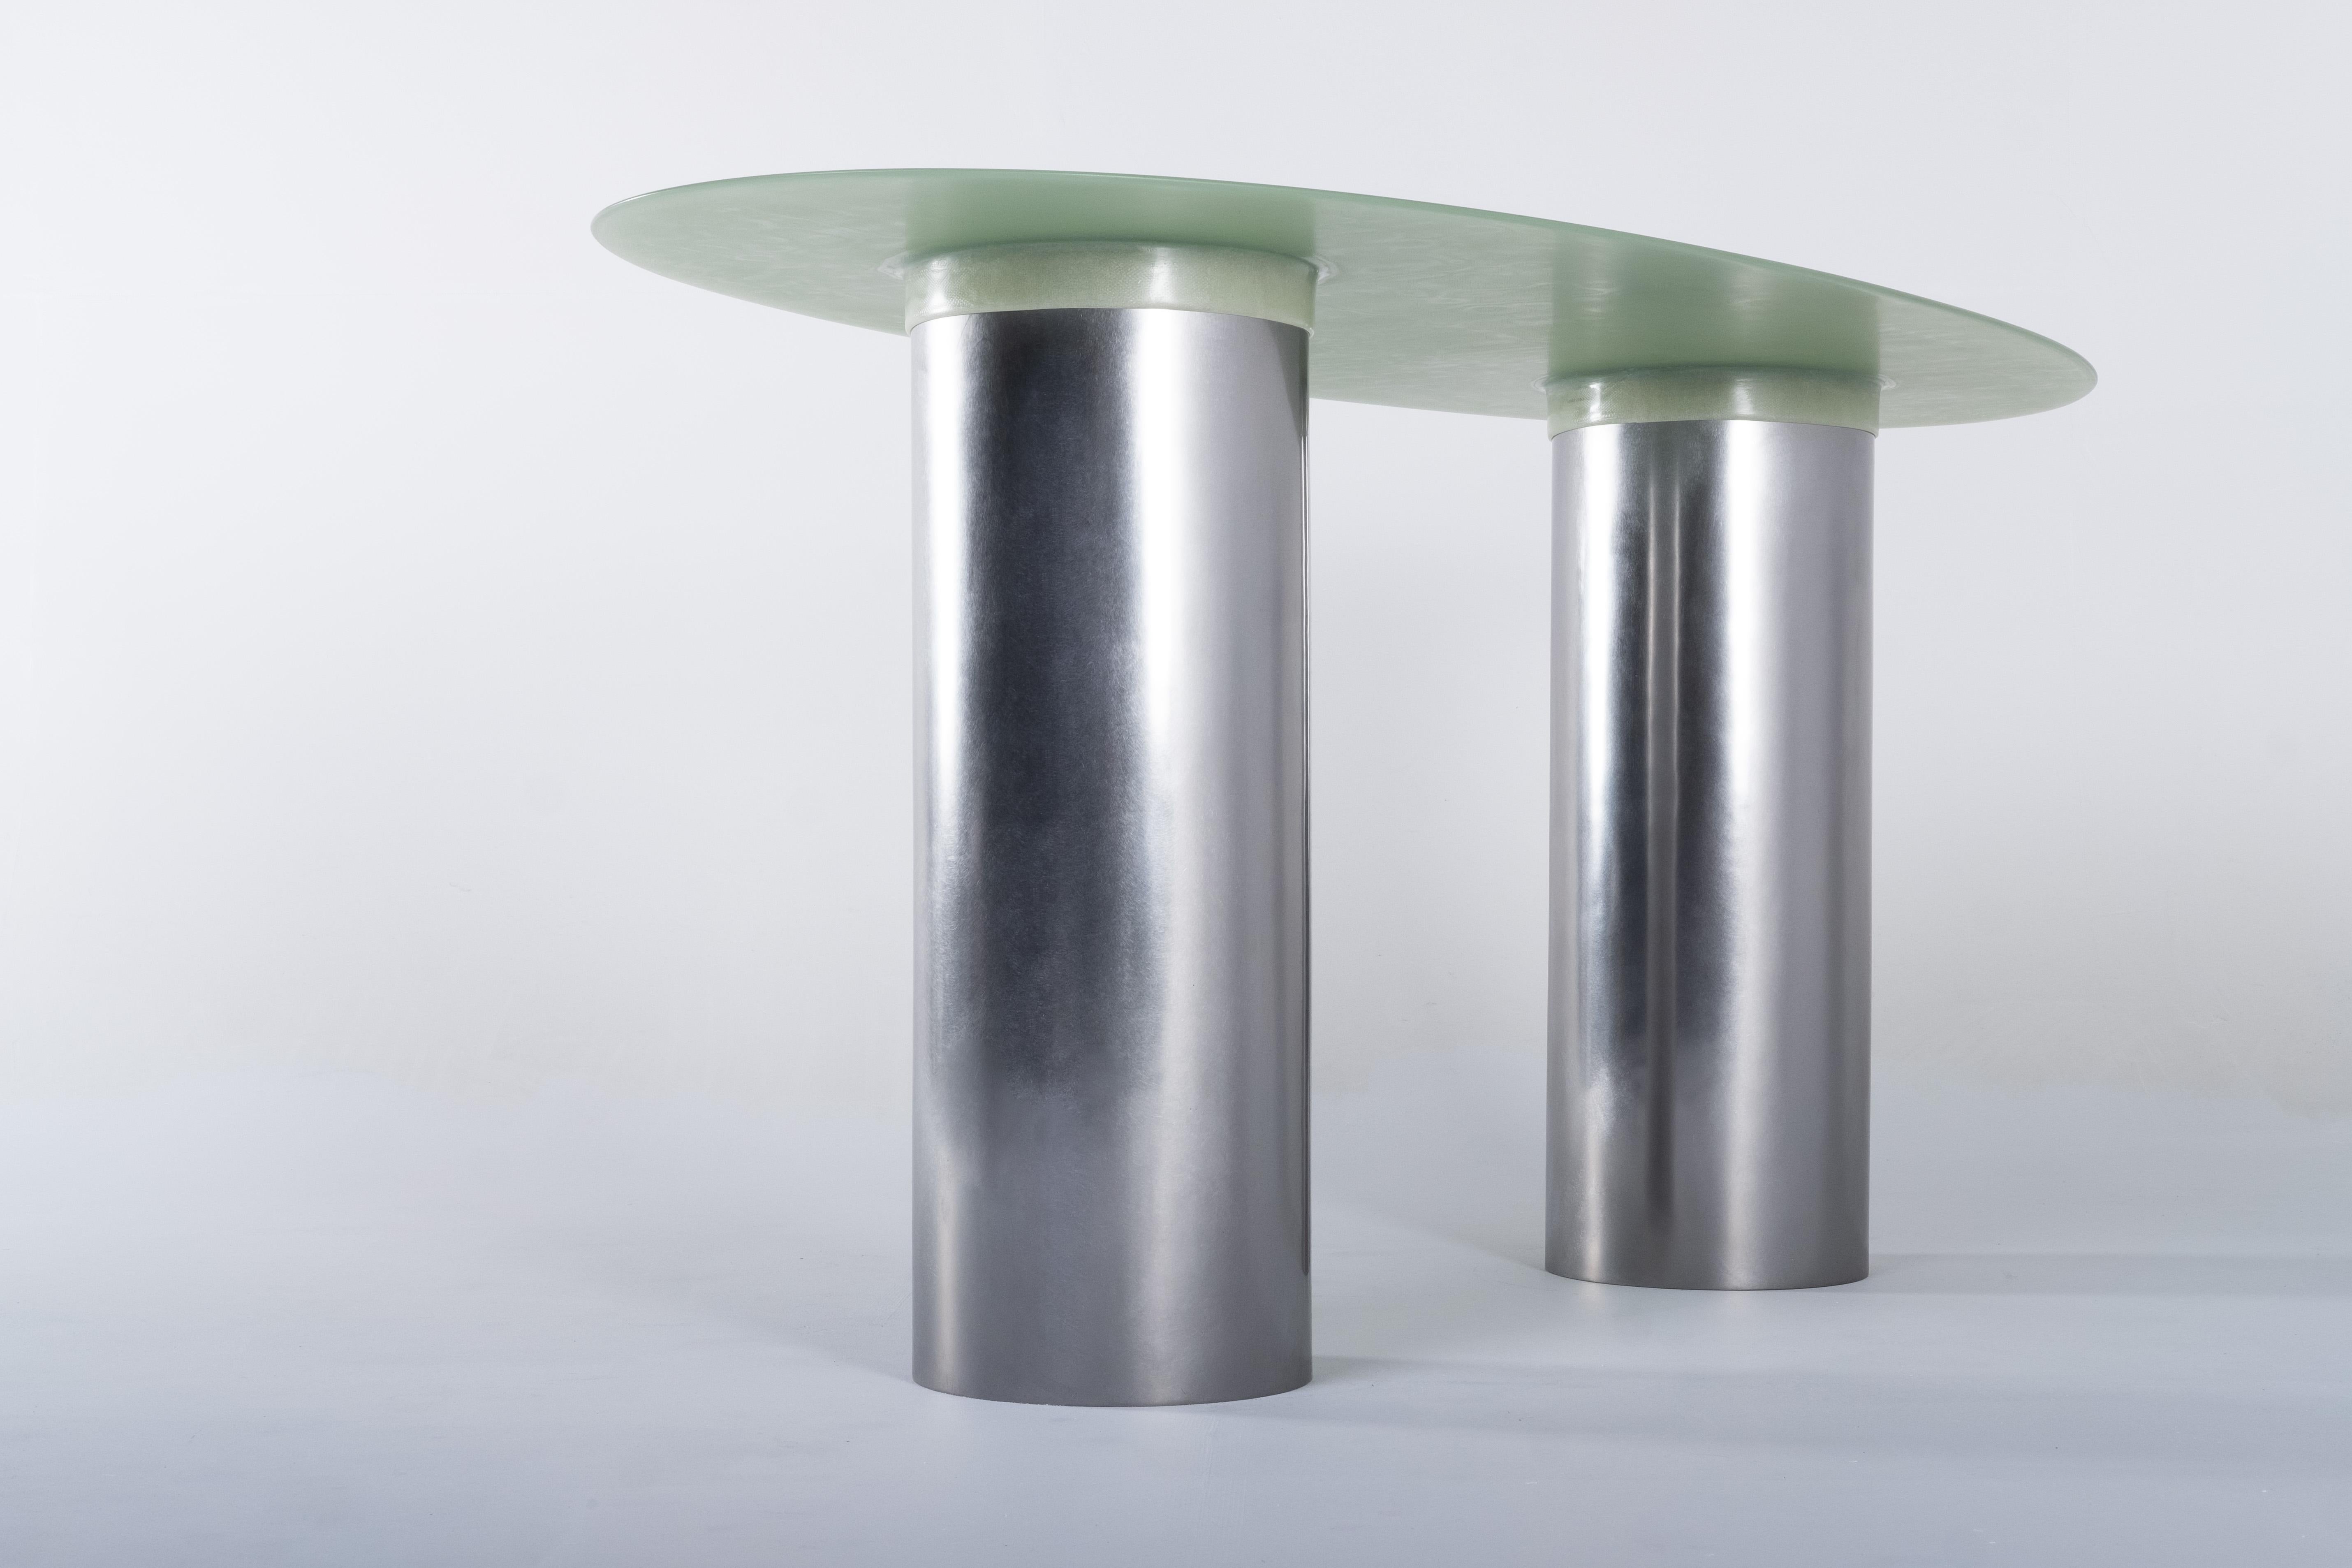 Hand-Crafted Contemporary Green transparant Fiberglass, Oval Desk Table 160cm, by Lukas Cober